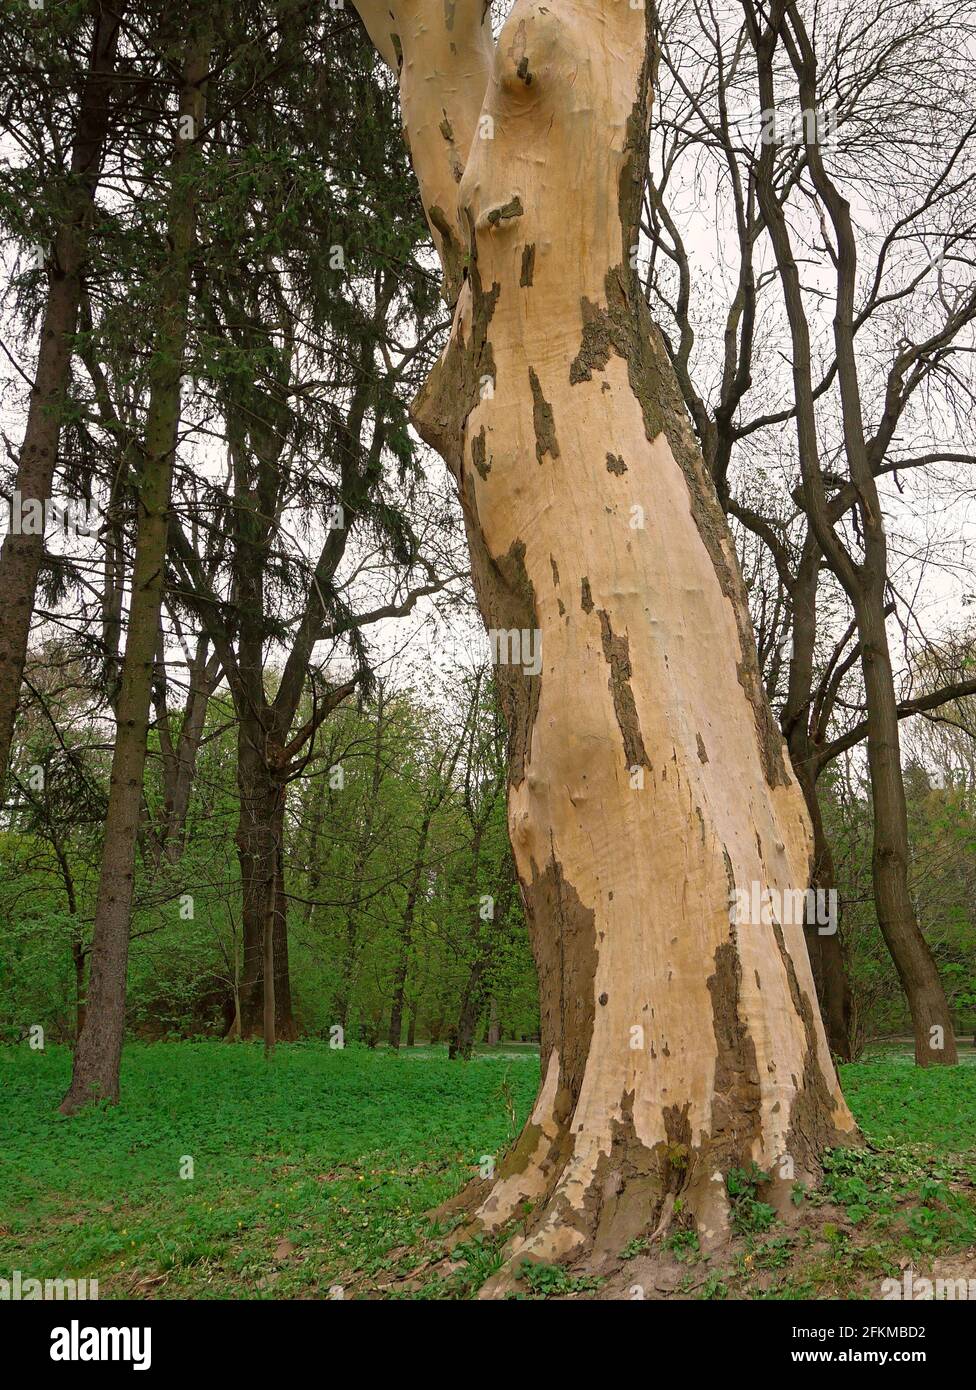 Lower part of the trunk of an big old plane tree or Platanus in the springtime in the famous Stryi Park in Lviv, Ukraine Stock Photo